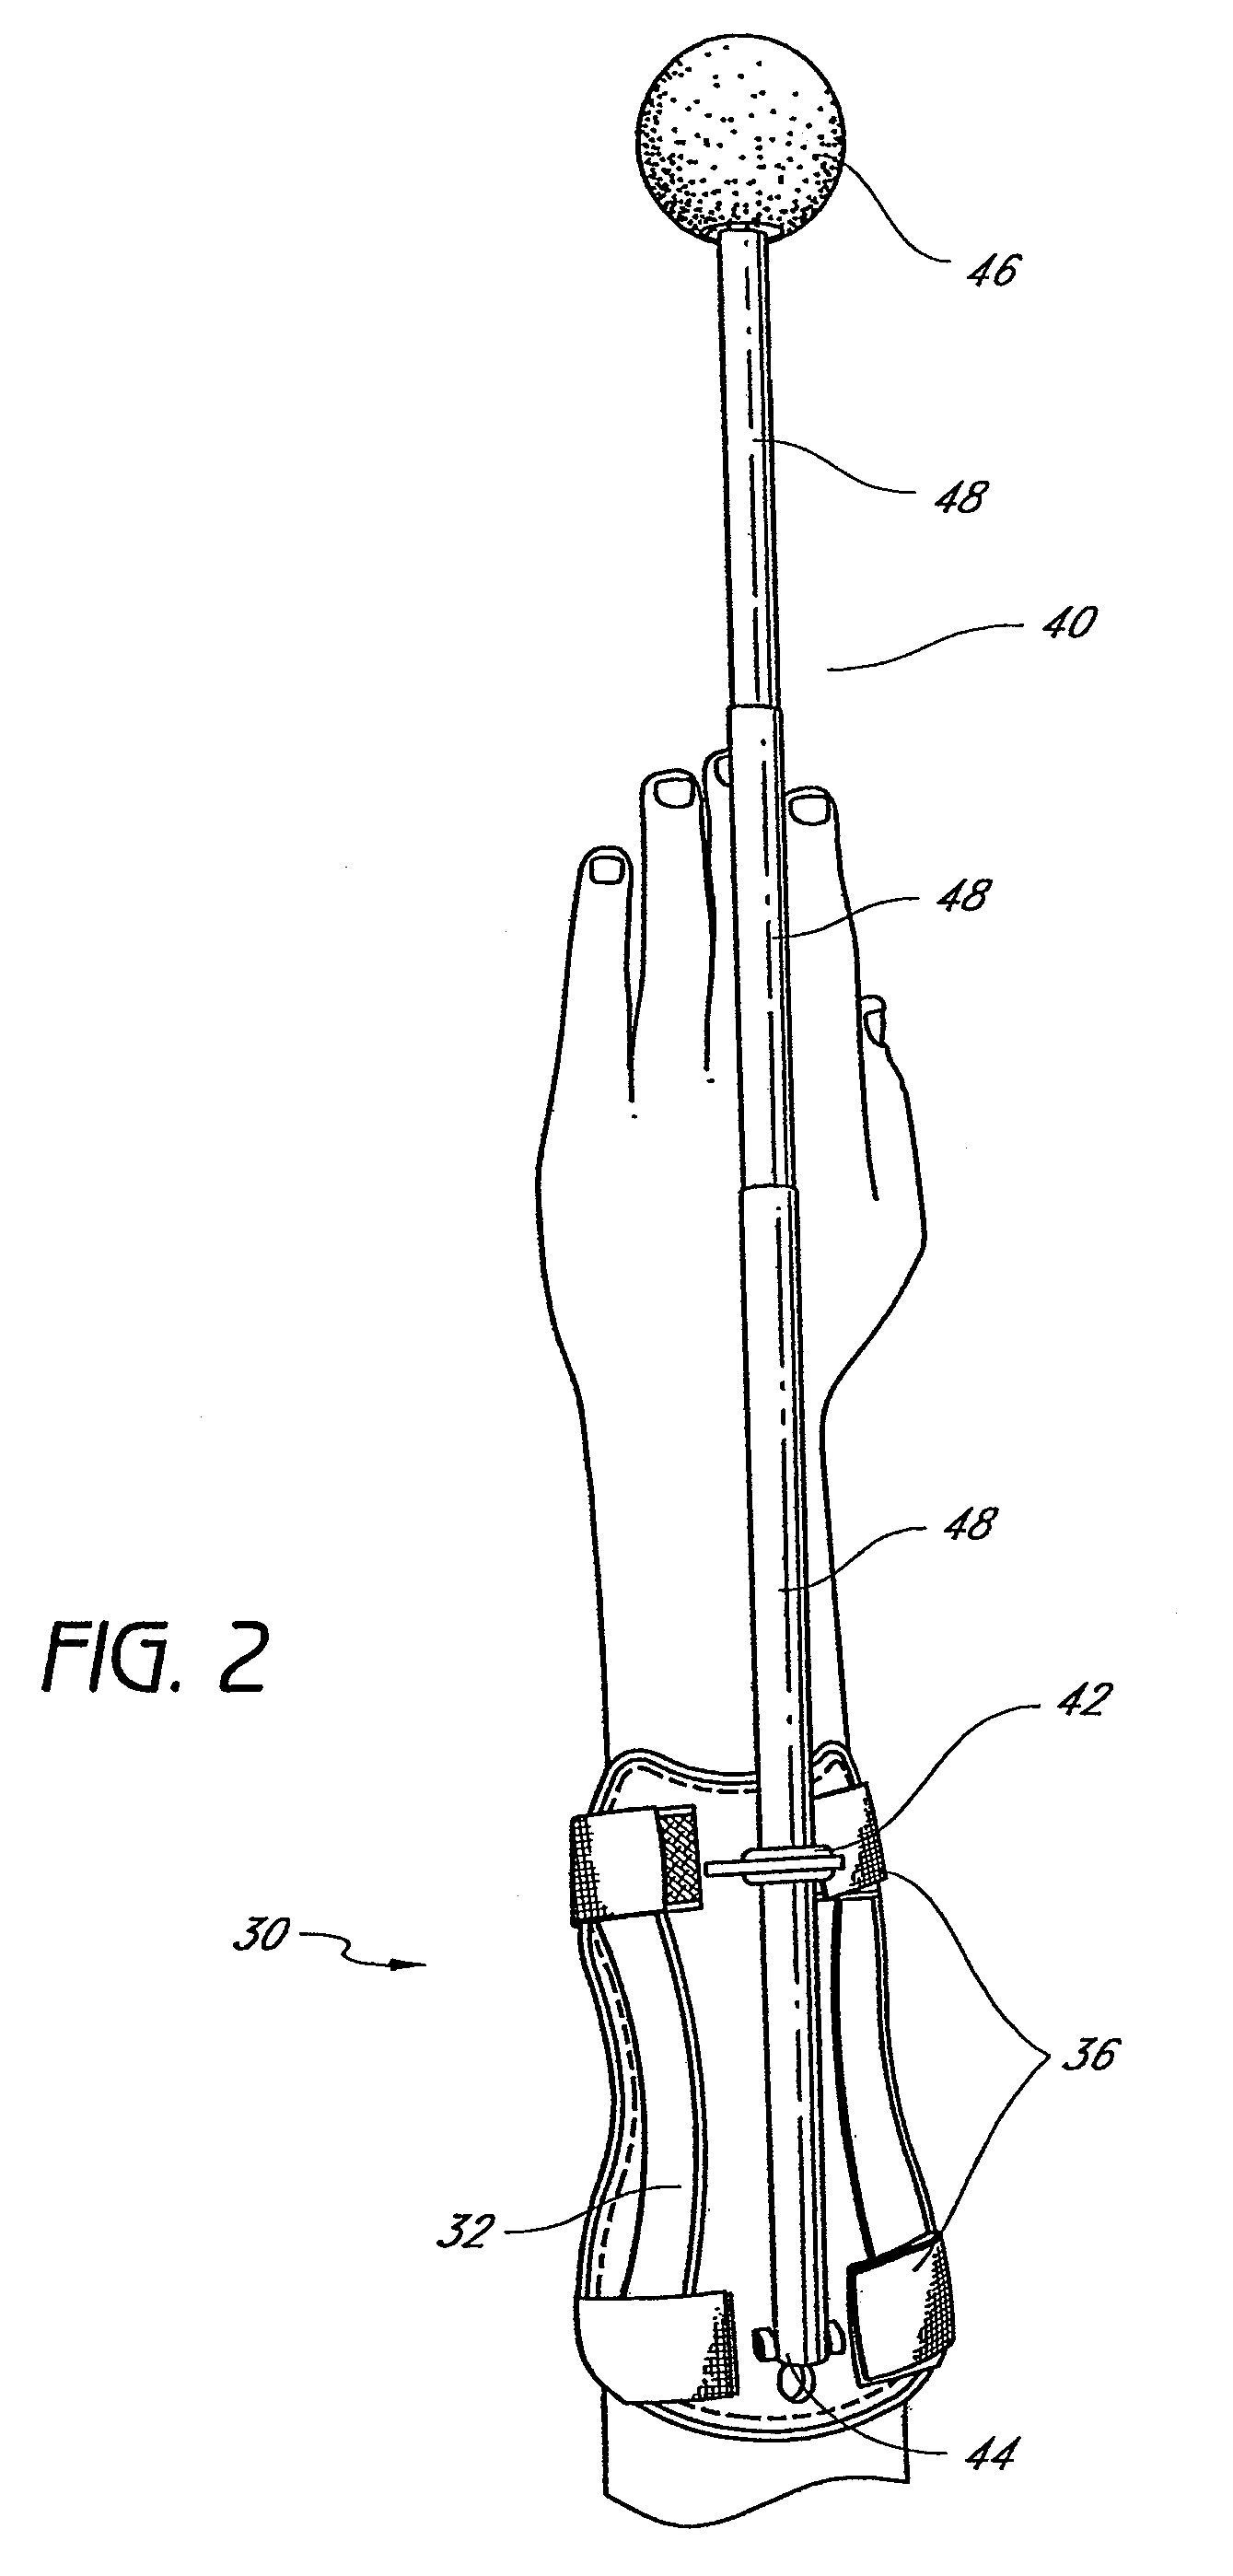 Method of enhancing participant's performance in a sporting activity